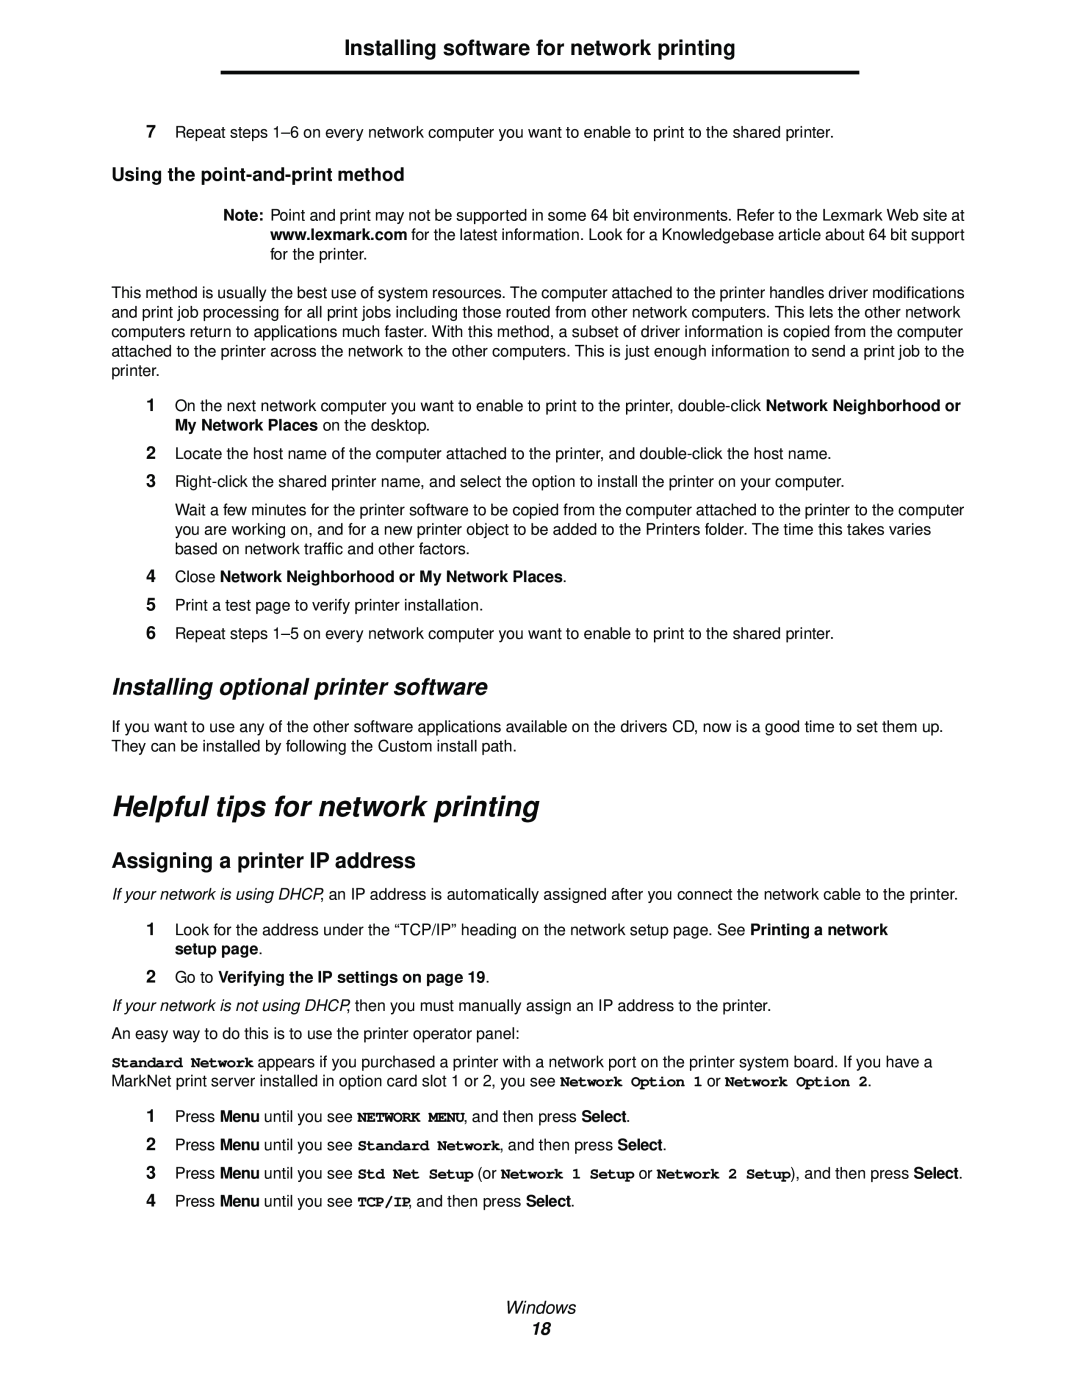 Lexmark 342n, 340 Helpful tips for network printing, Assigning a printer IP address, Installing optional printer software 